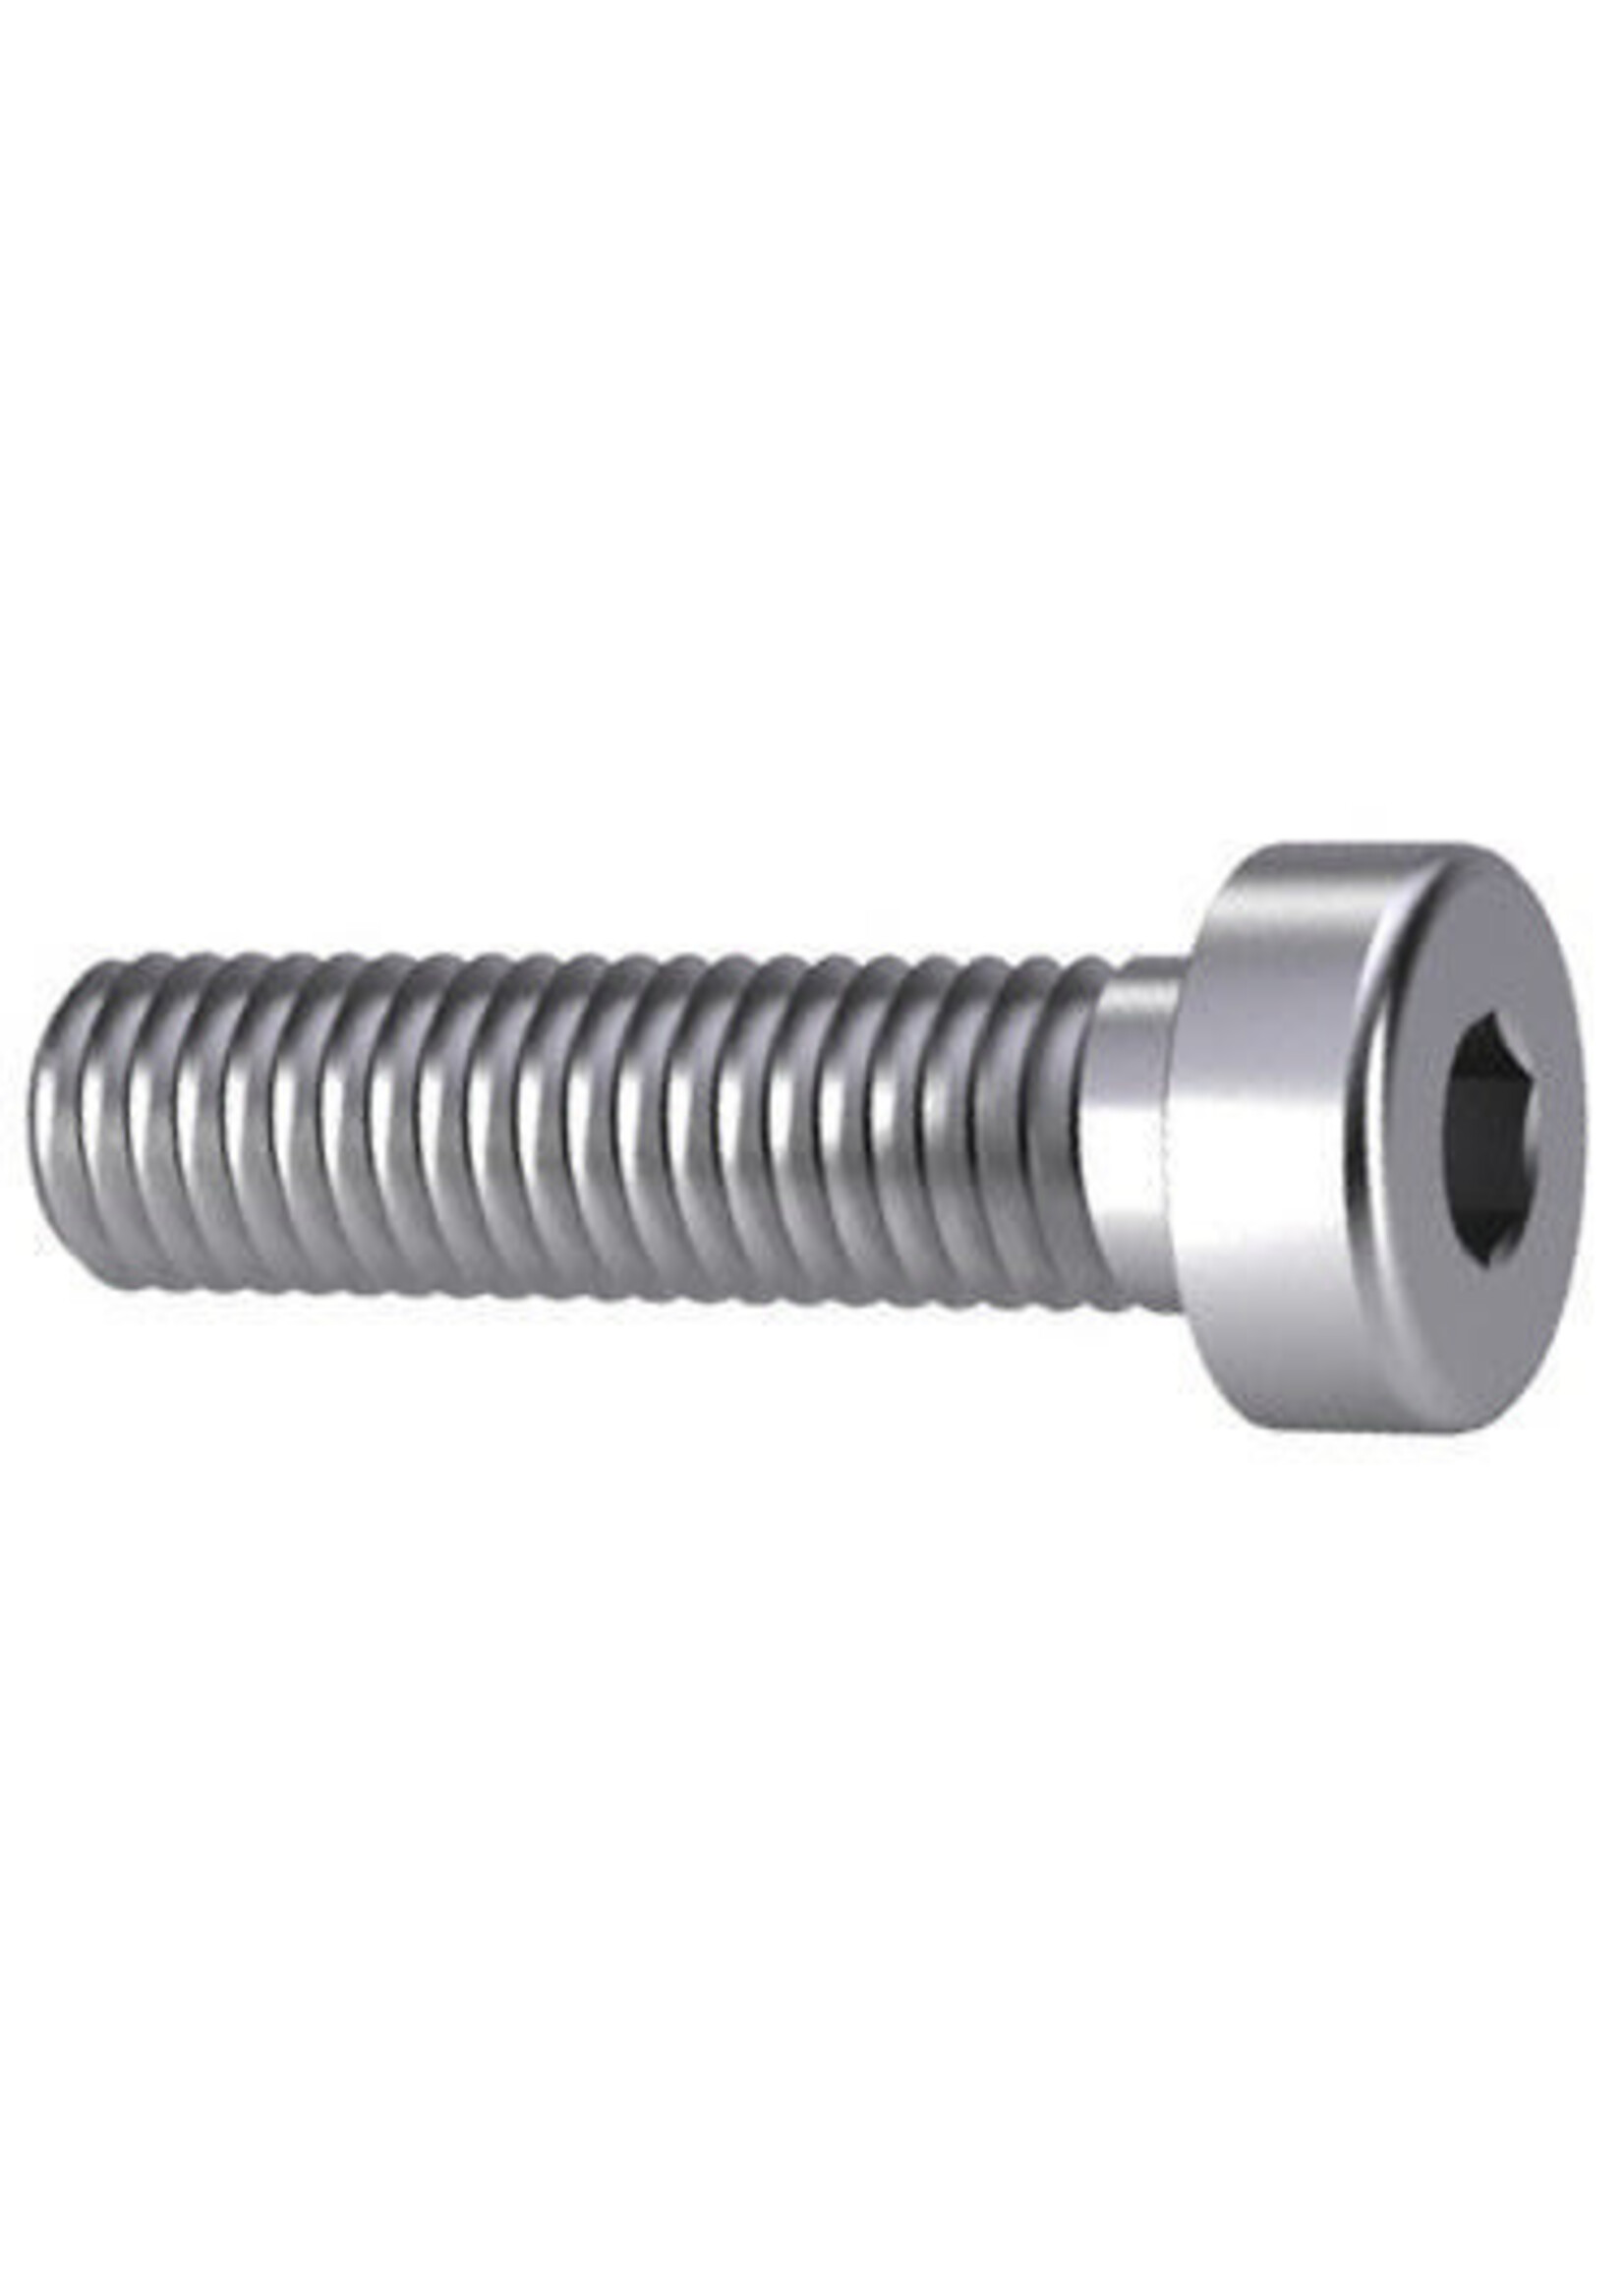 Universal Parts Cylindrical hexagon socket screw with low head DIN 7984 Steel Zinc plated 08.8 M4X